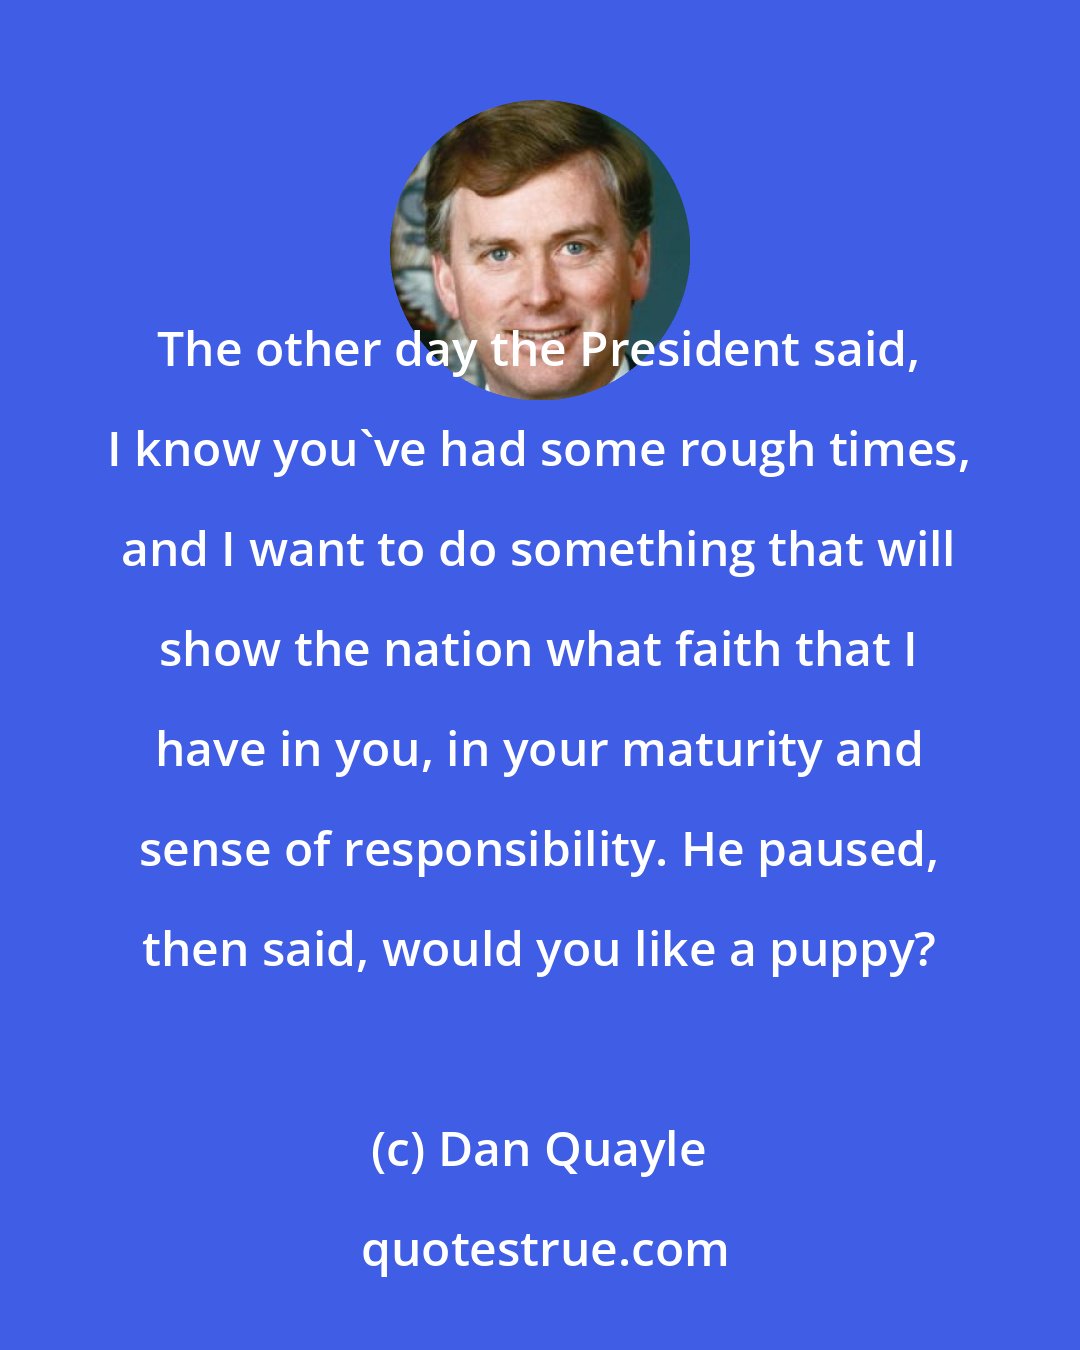 Dan Quayle: The other day the President said, I know you've had some rough times, and I want to do something that will show the nation what faith that I have in you, in your maturity and sense of responsibility. He paused, then said, would you like a puppy?